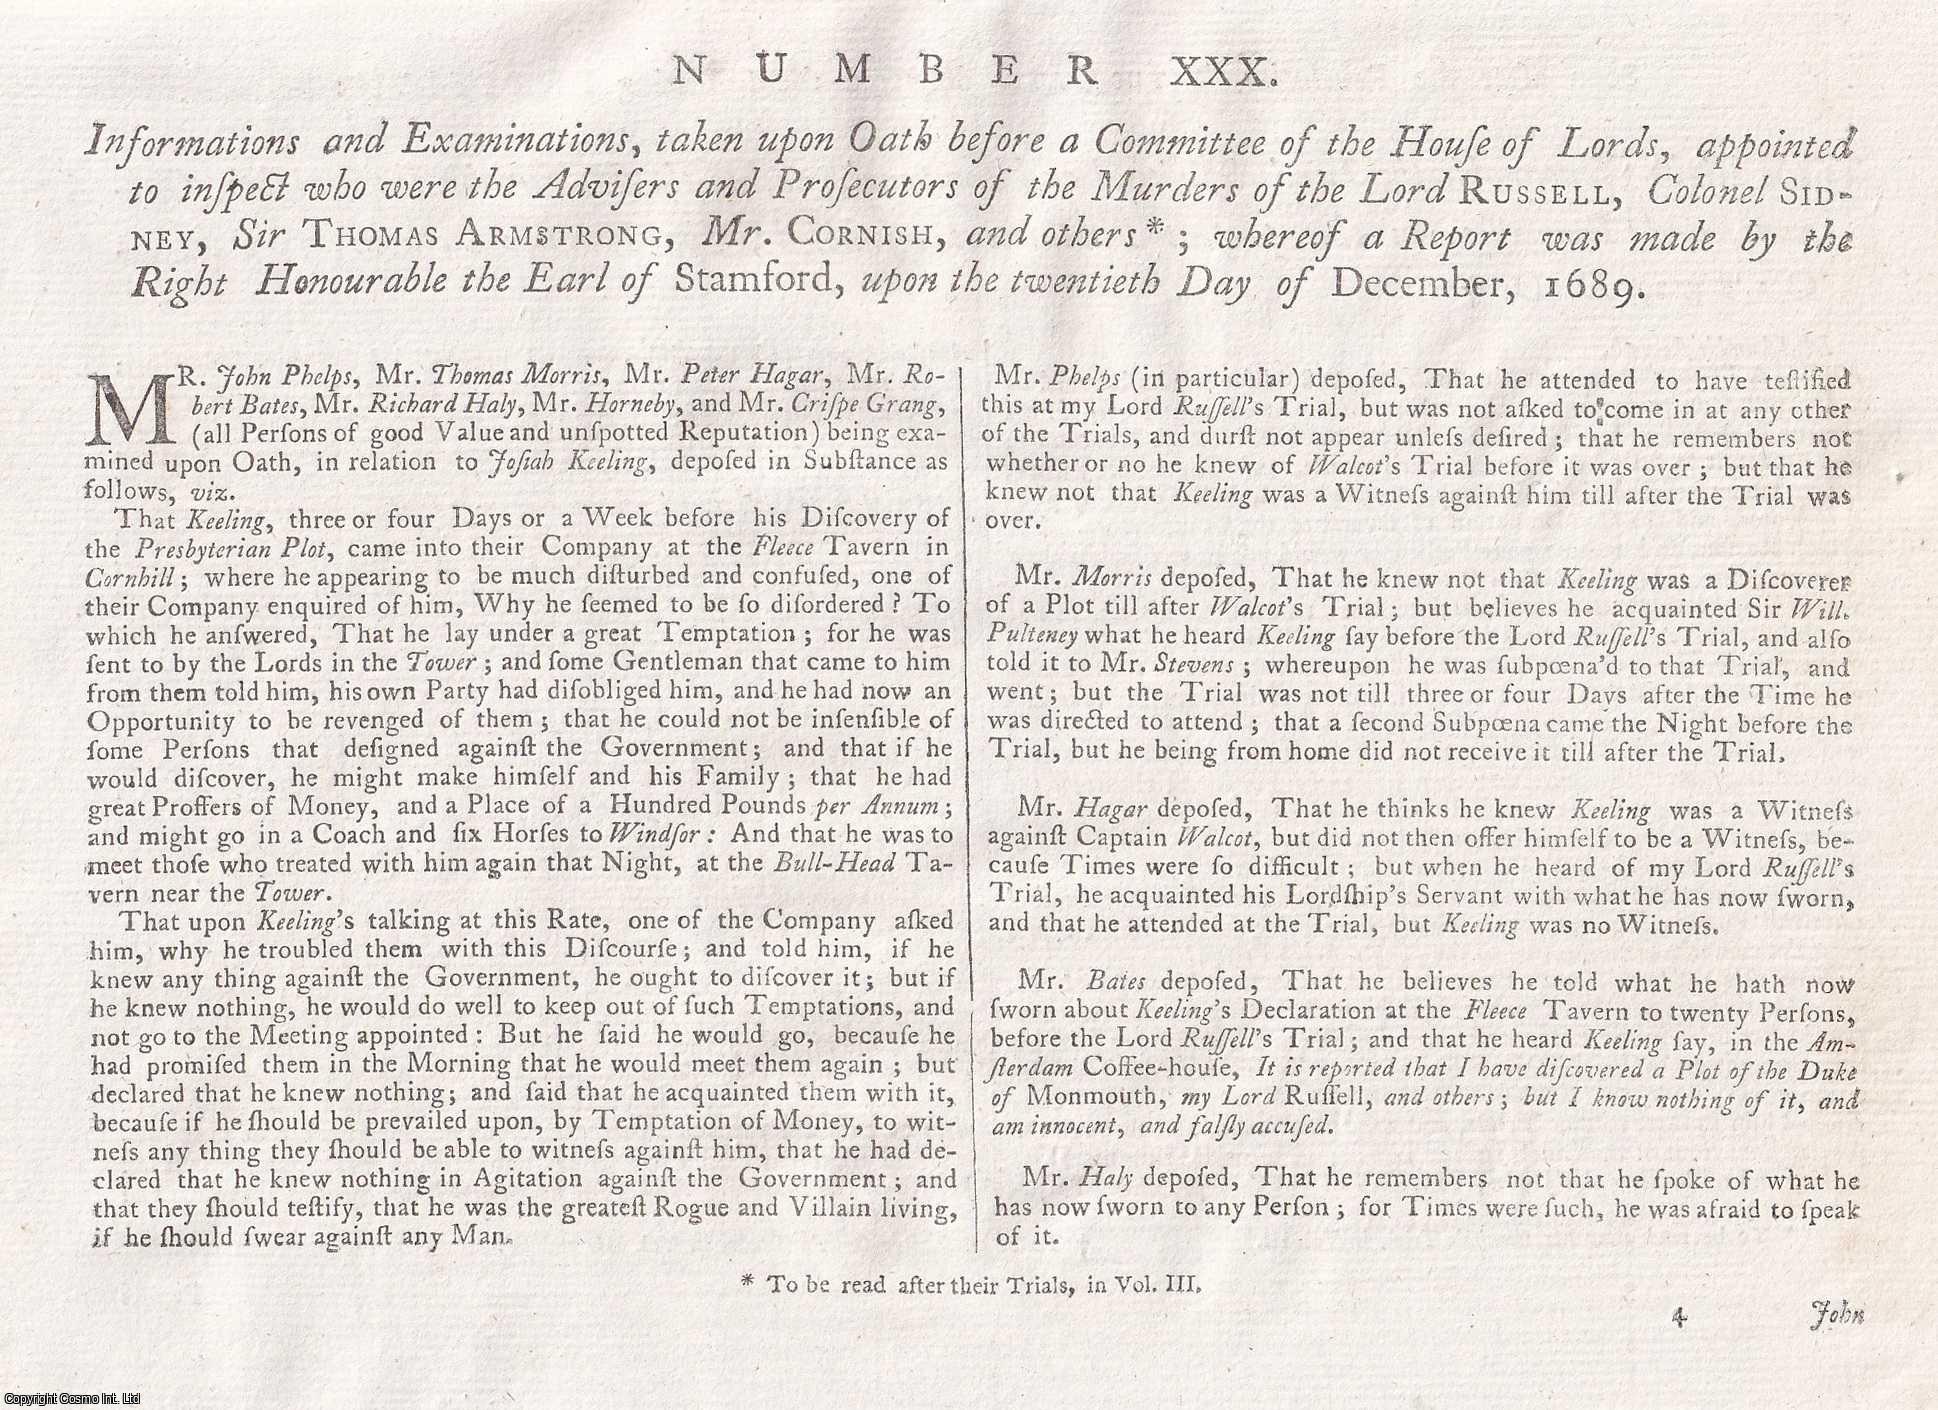 [Trial] - RYE HOUSE PLOT. Informations and Examinations, taken upon Oath before a Committee of the House of Lords, appointed to inspect who were the Advisers and Prosecutors of the Murders of the Lord Russell, Colonel Sidney, Sir Thomas Armstrong, Mr Cornish, and others; whereof a Report was made by the Right Honourable the Earl of Stamford, upon the 20th Day of December, 1689. An original article from the Collected State Trials.